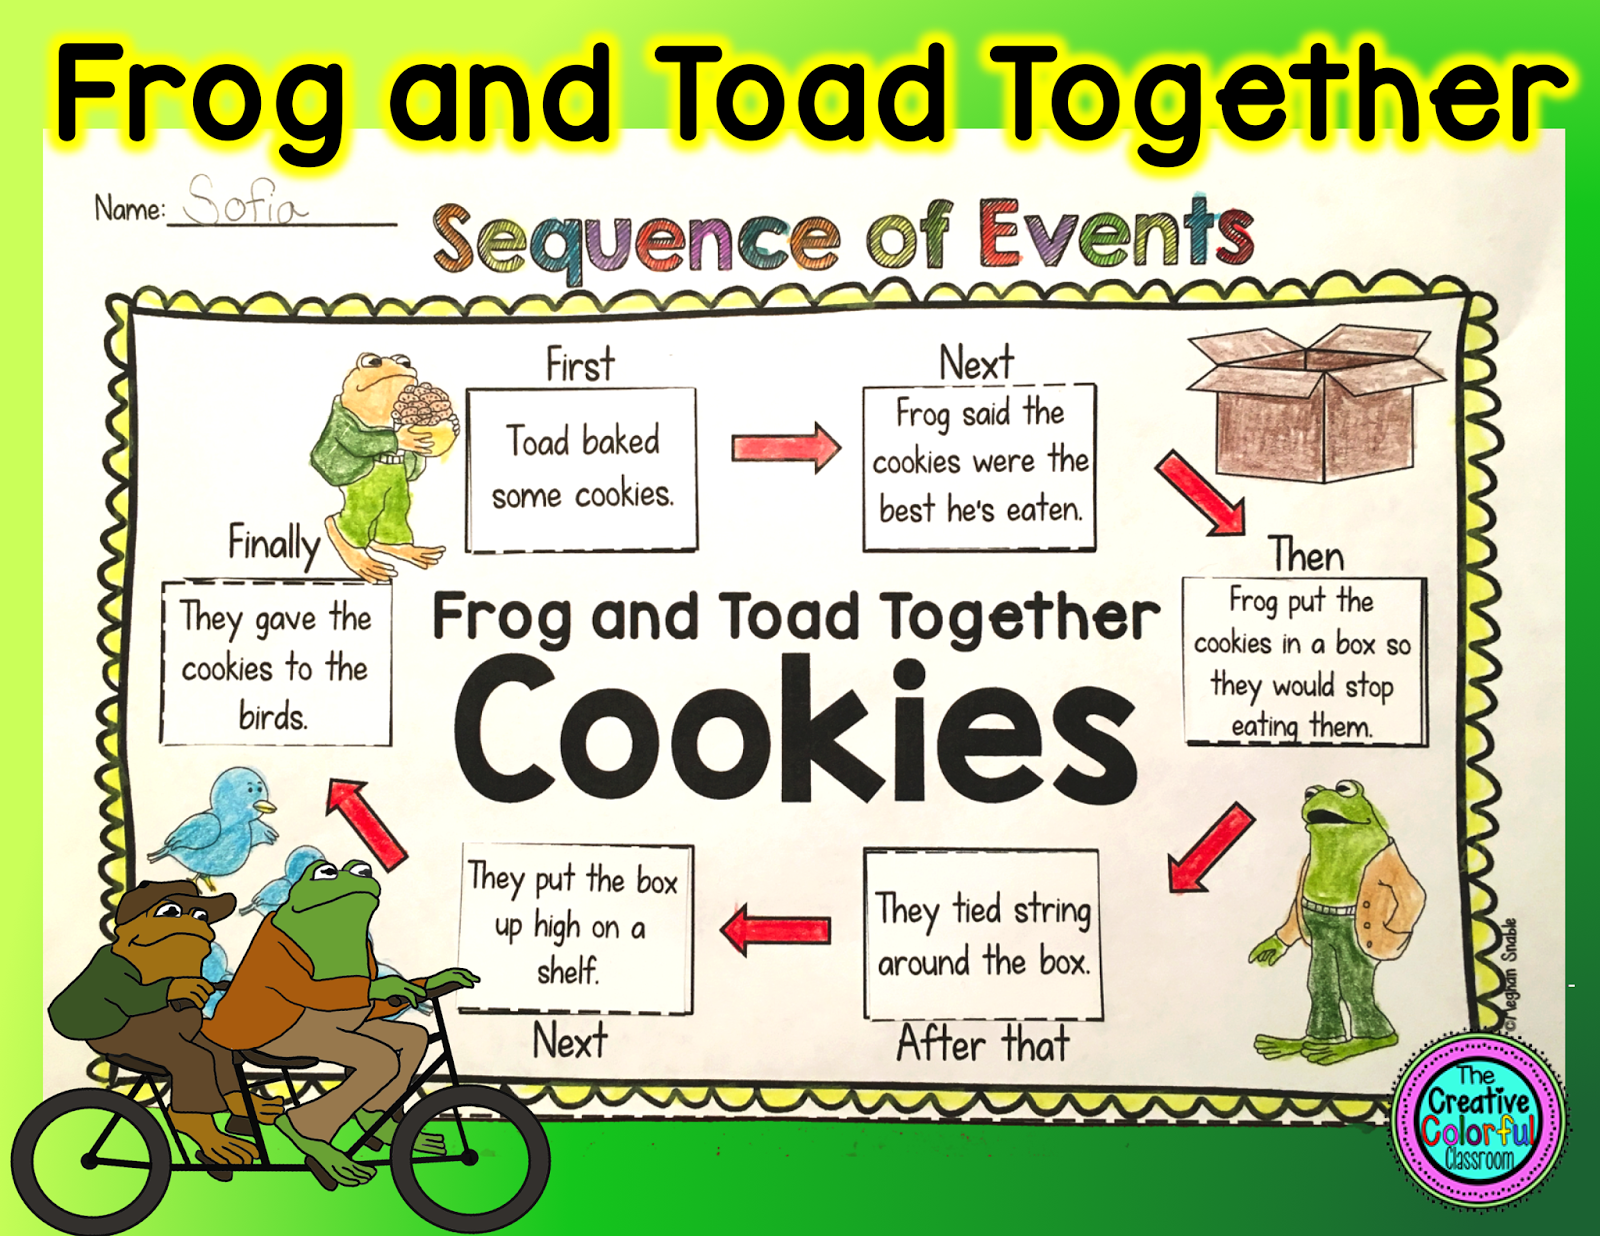 the-creative-colorful-classroom-frog-and-toad